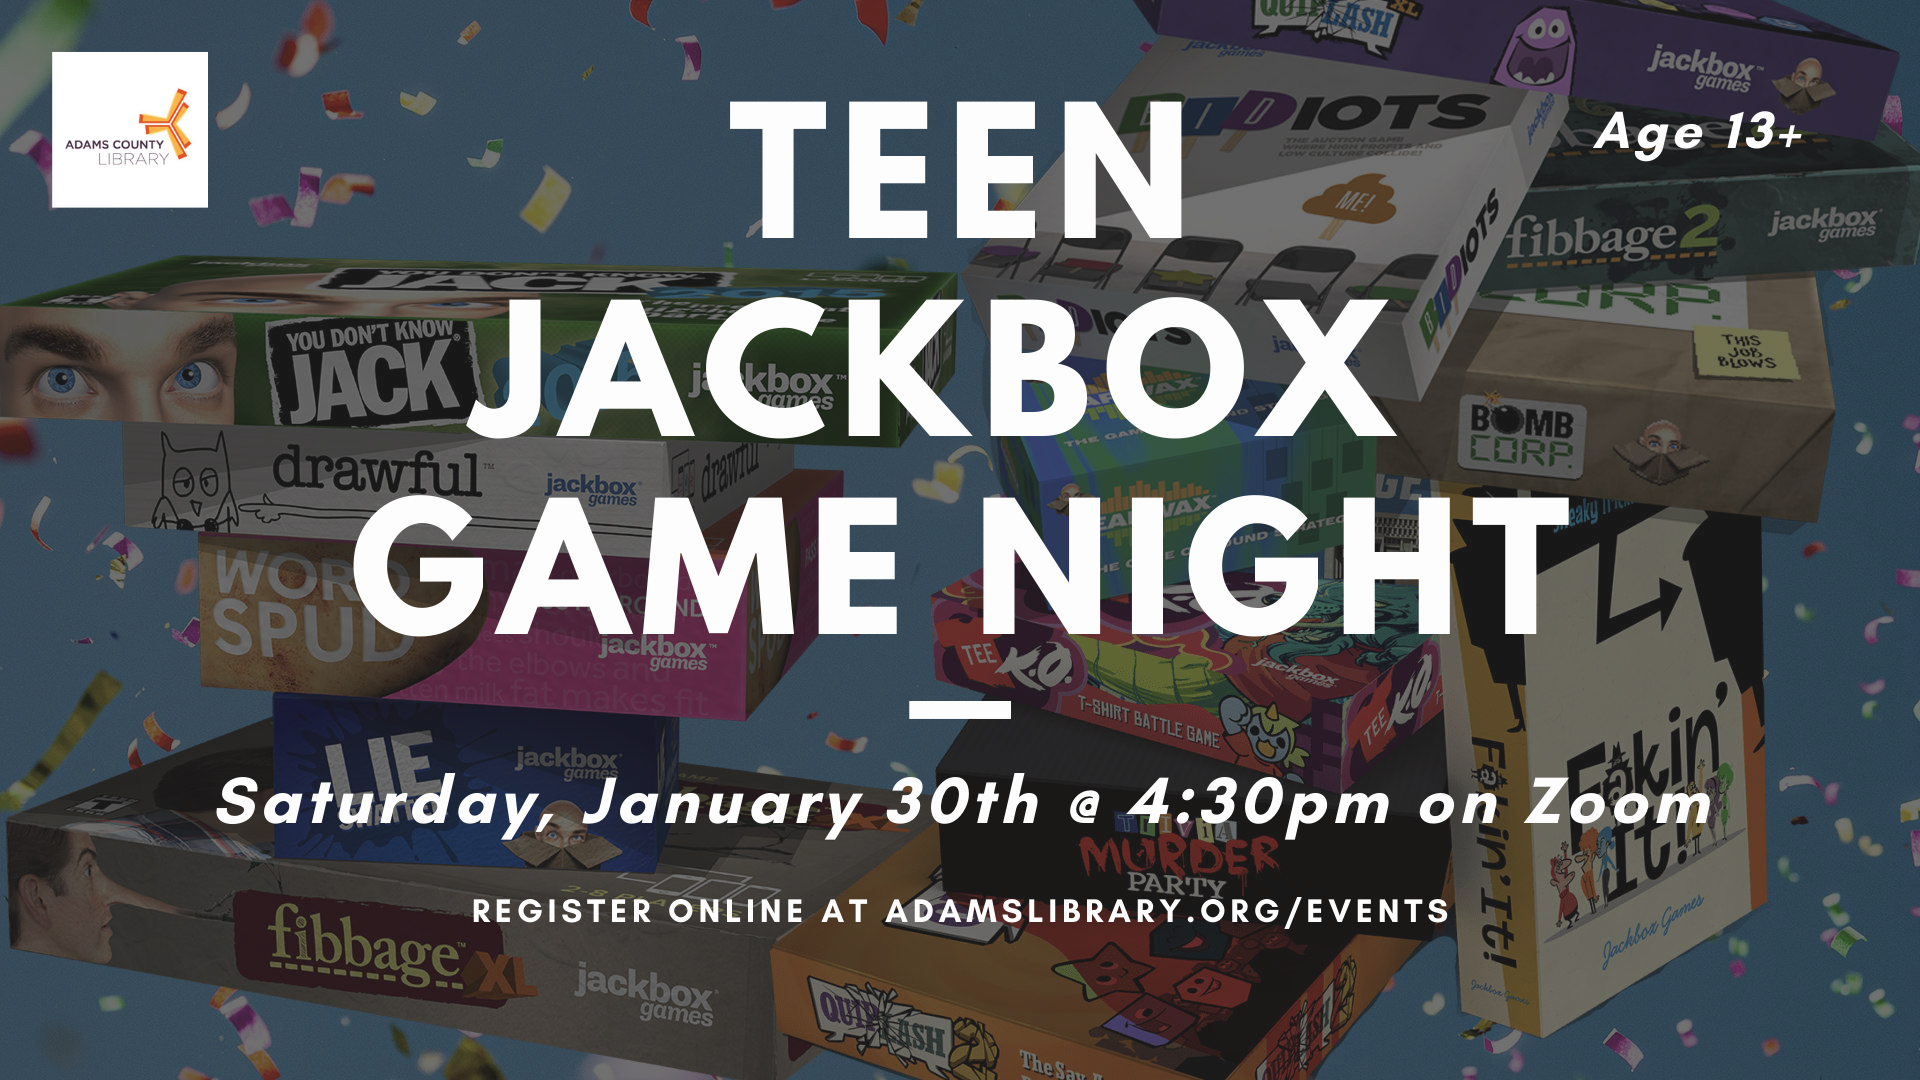 Teen Jackbox Game Night on January 30th at 4:30pm. Register online at adamslibrary.org/events. For ages 13 and up.